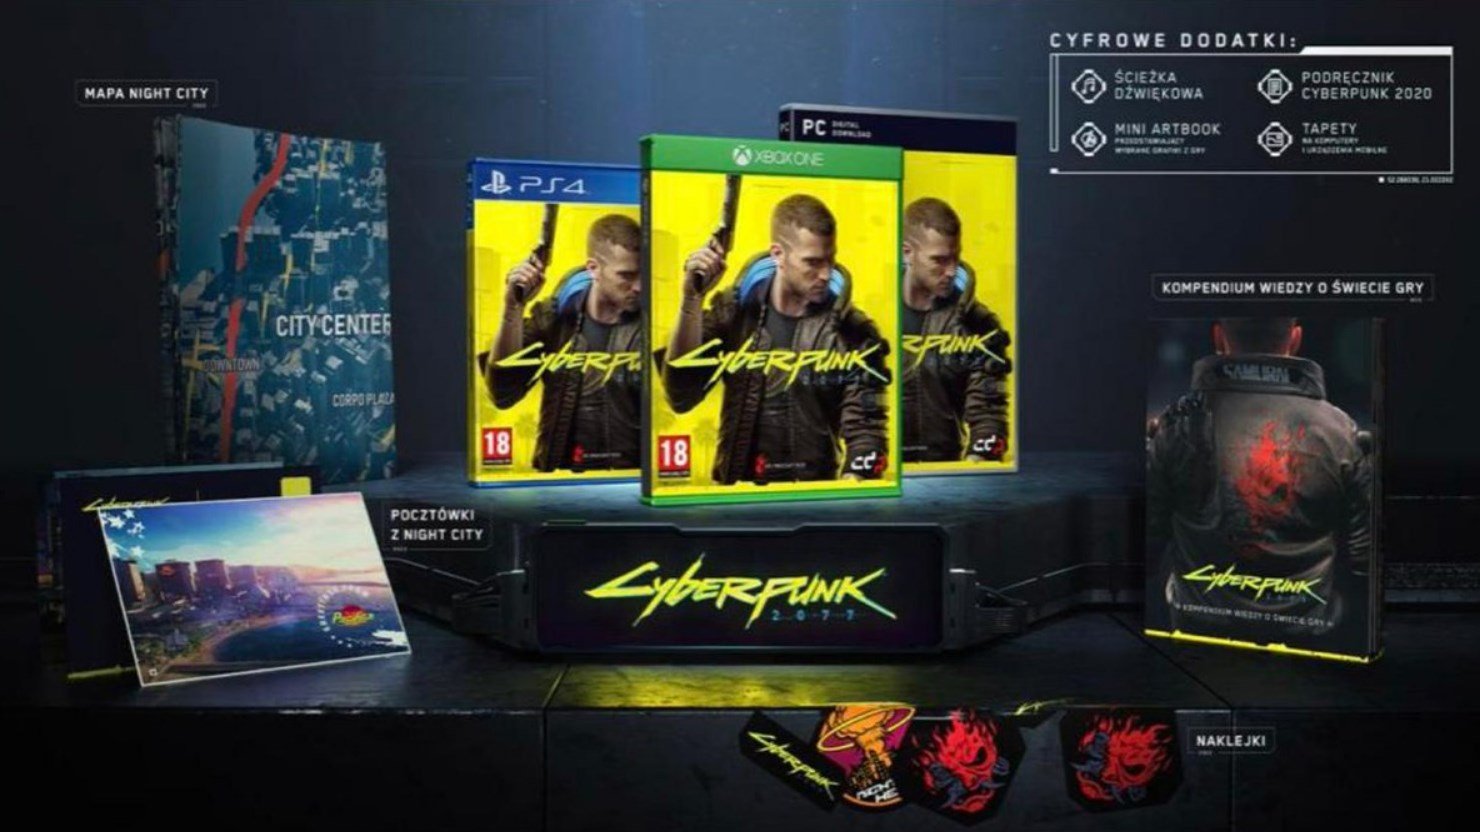 E3 2019 Cyberpunk 2077 PS4 Packaging Appears to Leak  Push Square